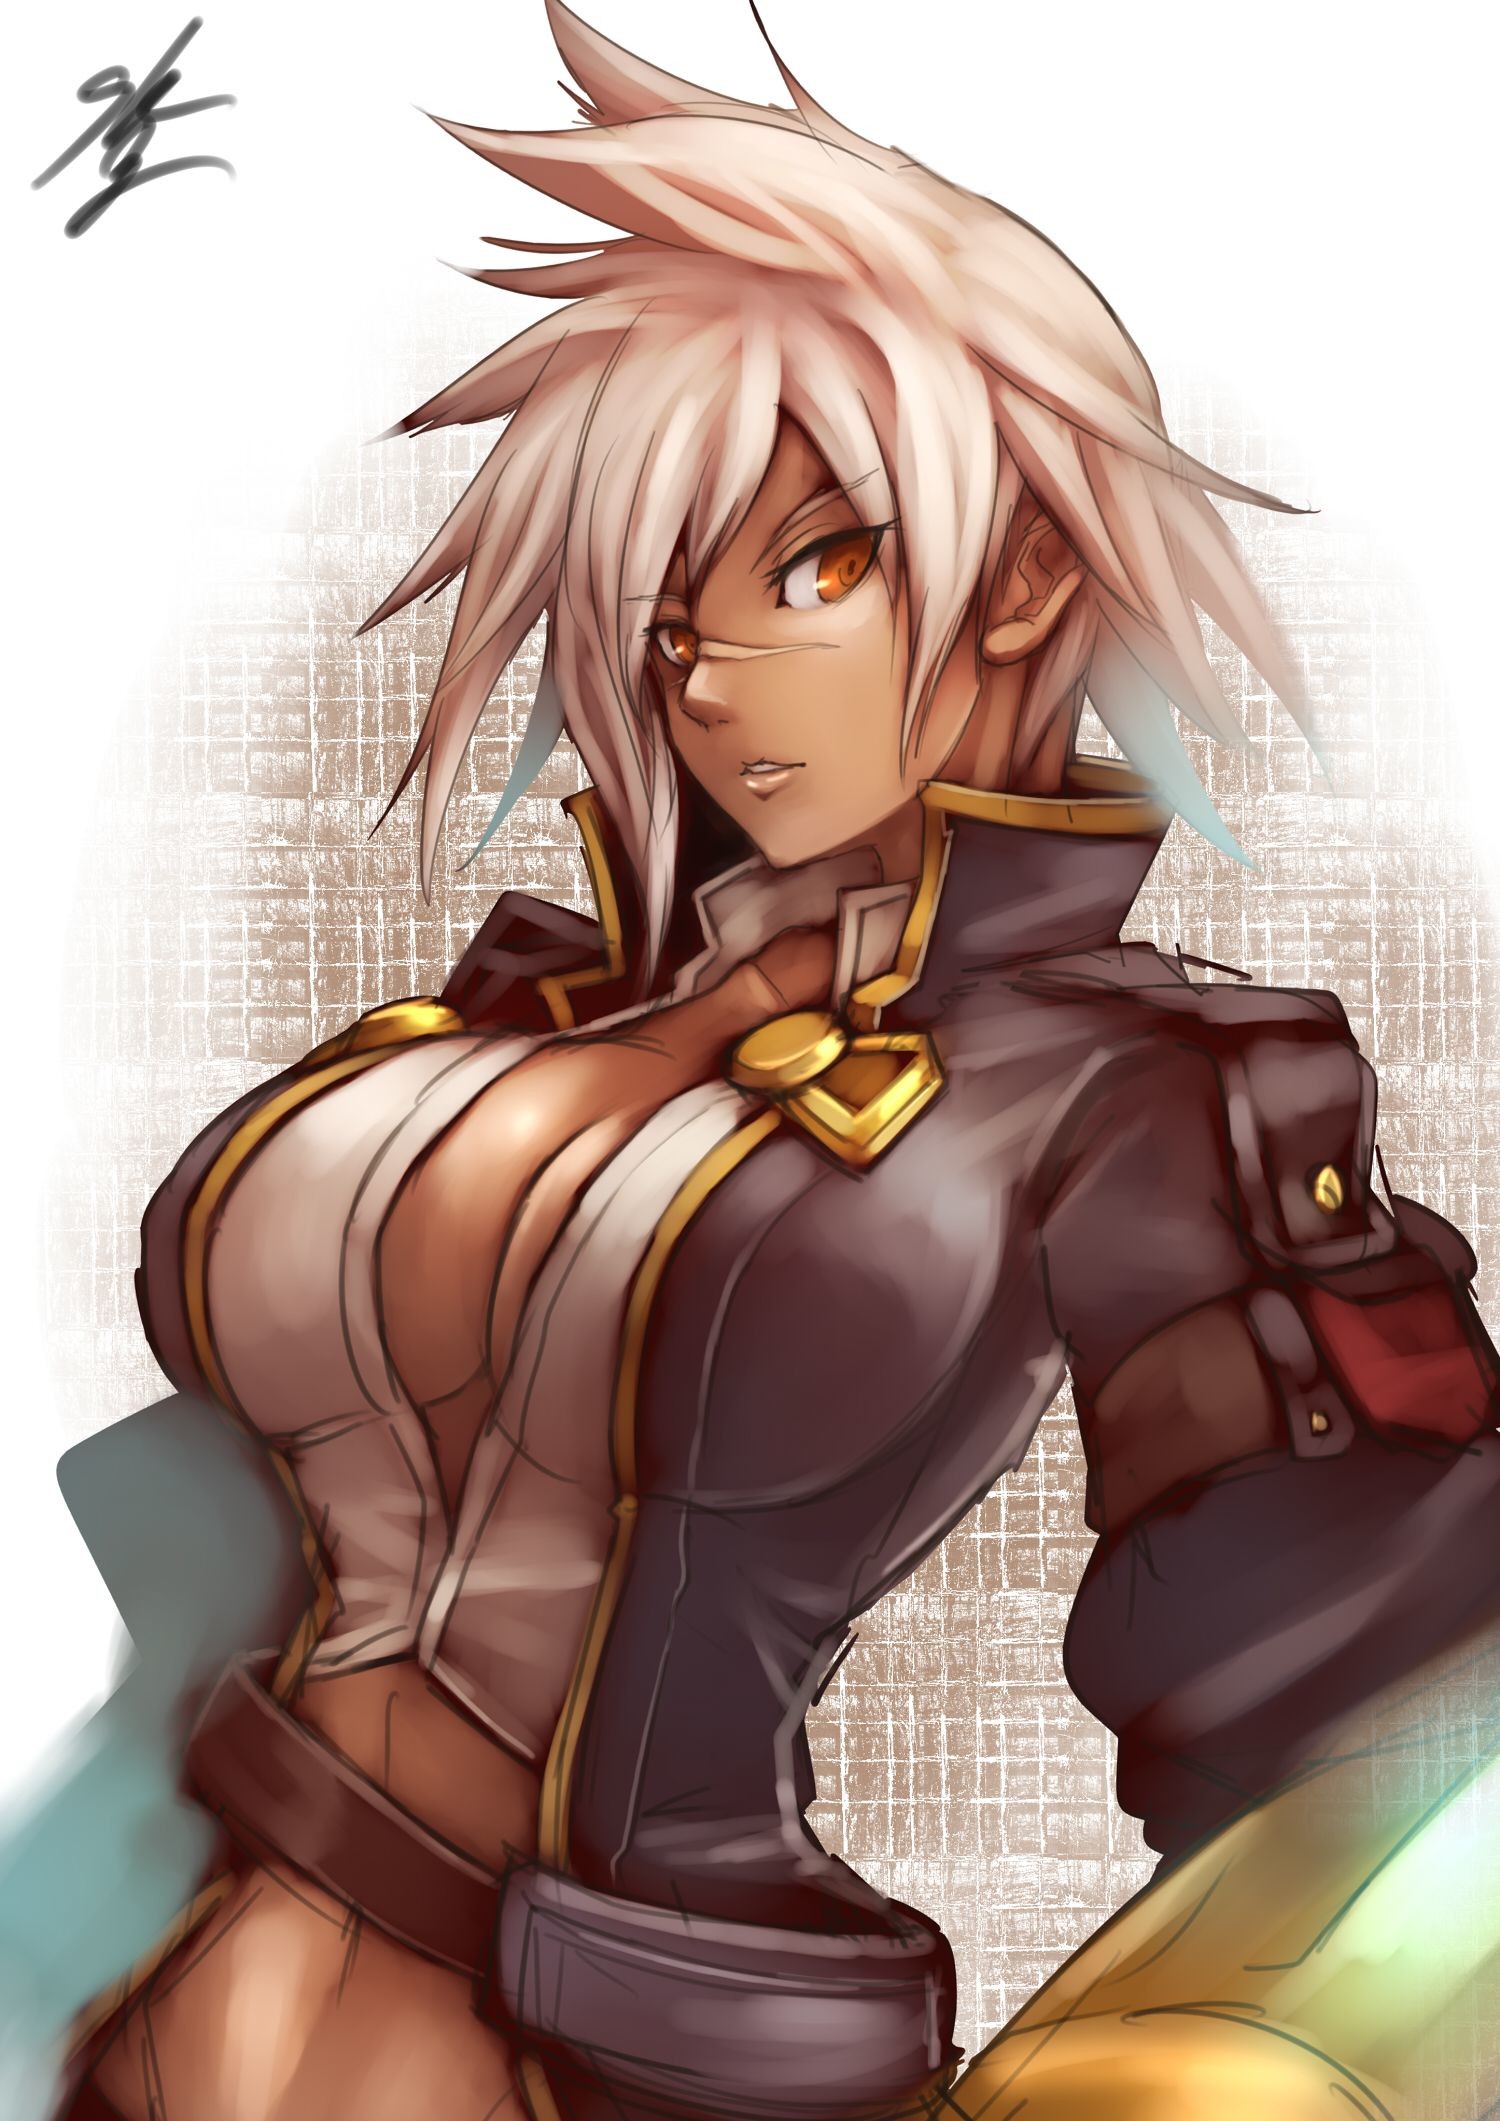 1500x2121 Bullet FROM Blazblue BY Sowel (SK3)